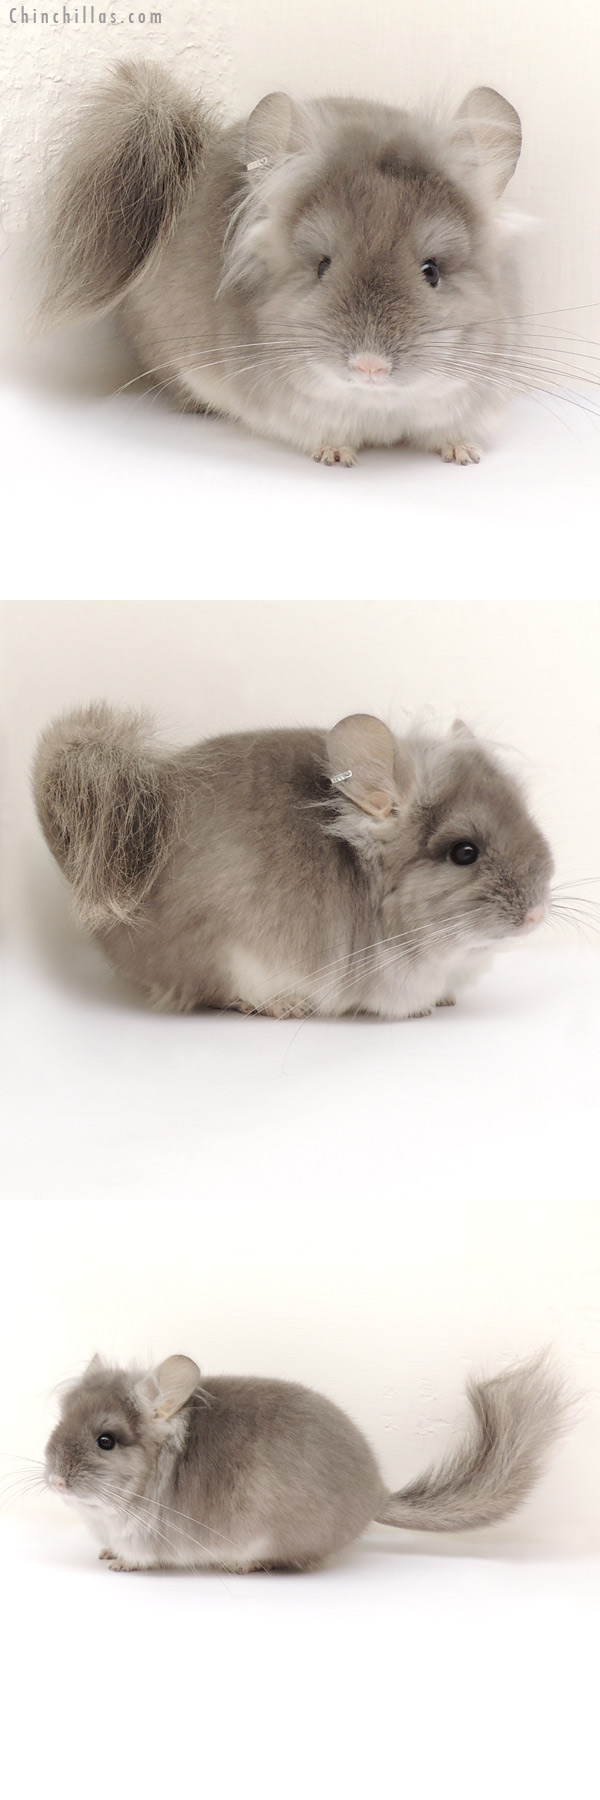 Chinchilla or related item offered for sale or export on Chinchillas.com - 13298 Exceptional Violet Royal Persian Angora Male Chinchilla